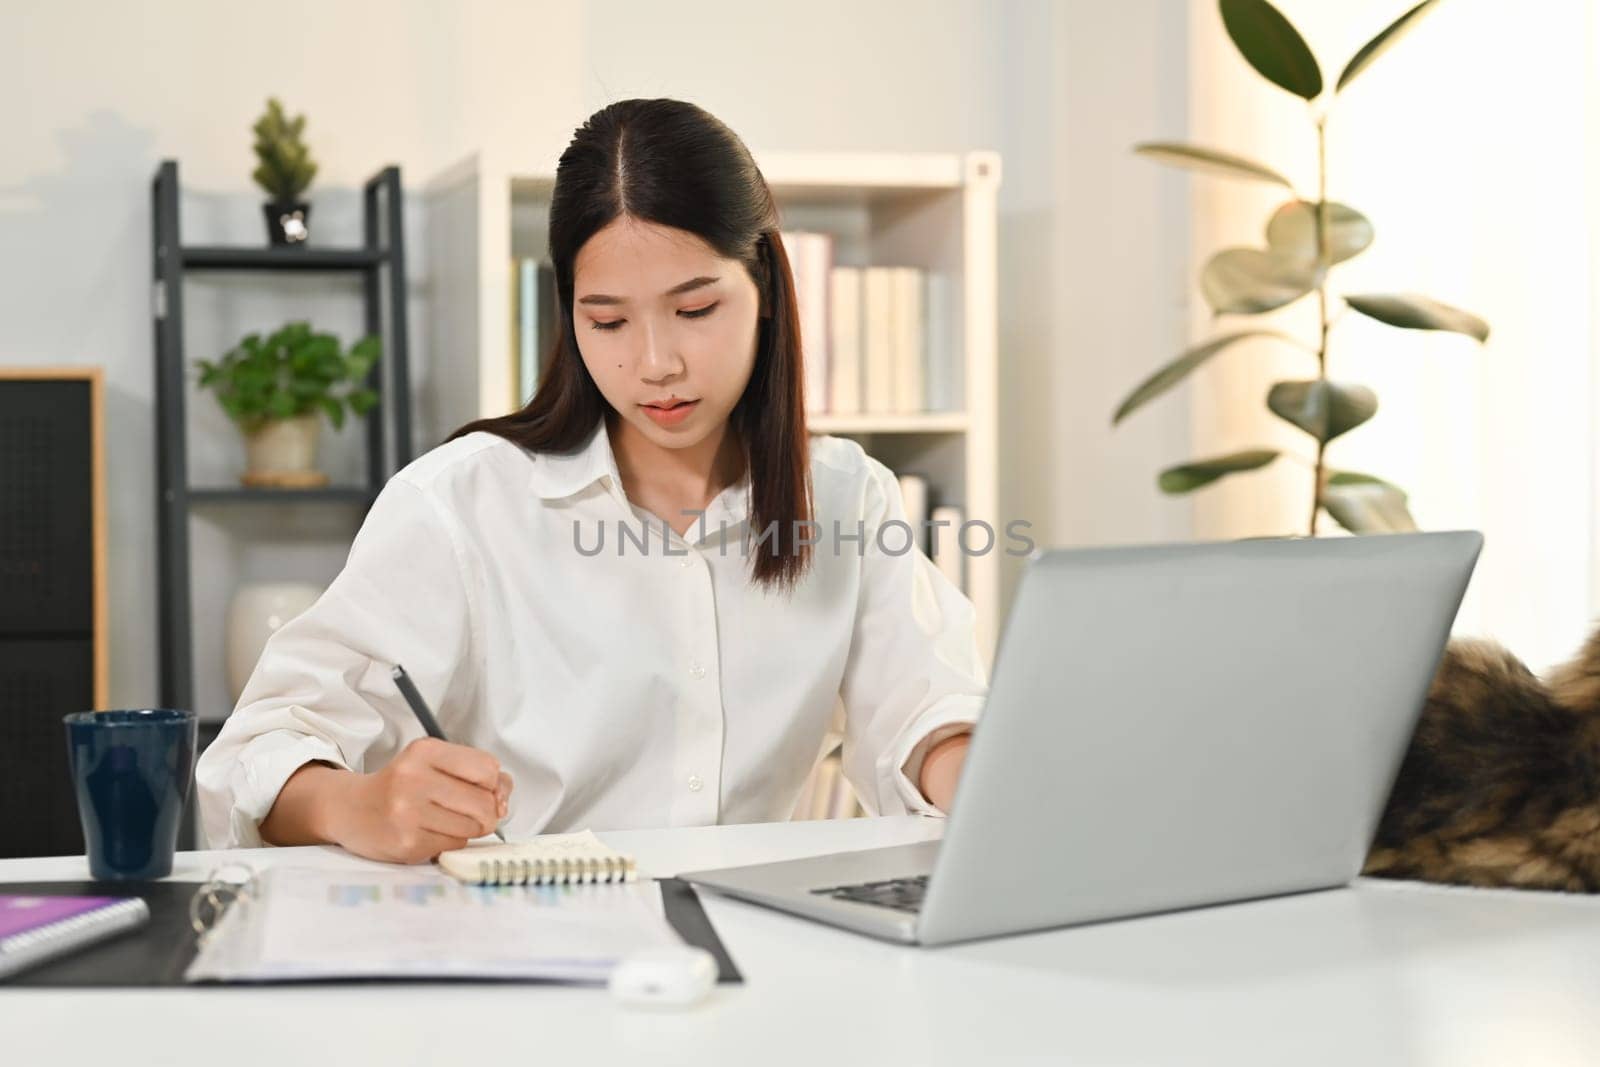 Attractive female entrepreneur sitting at desk using laptop computer and signing on business document.